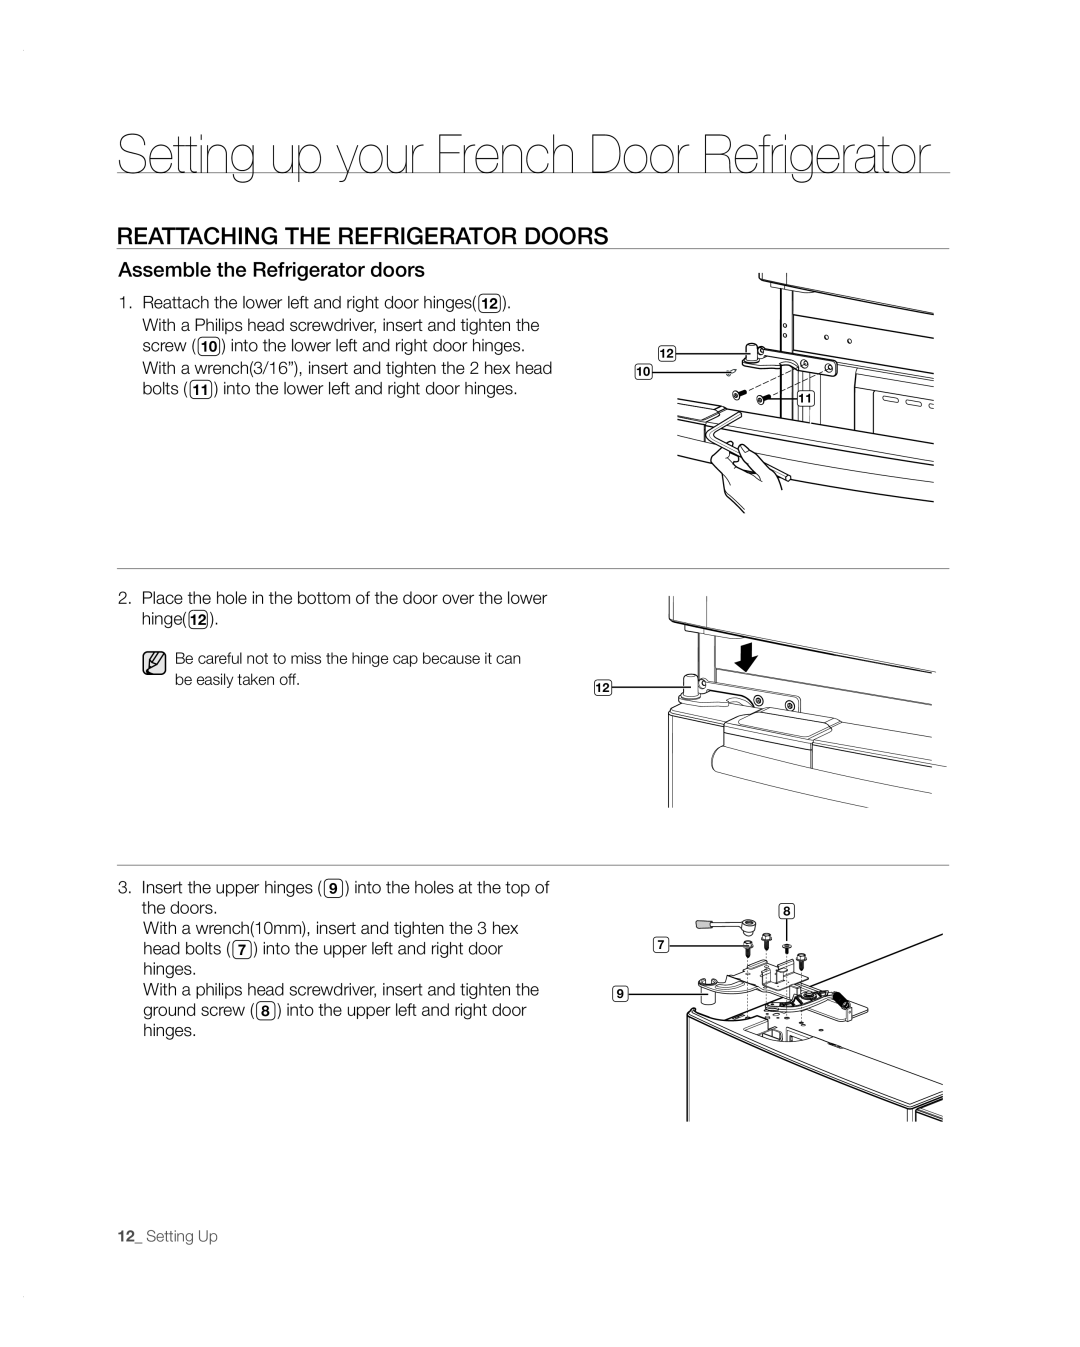 Samsung RFG297AARS/XAA user manual REAttACHinG tHE REFRiGERAtoR DooRs, Setting up your French Door Refrigerator 